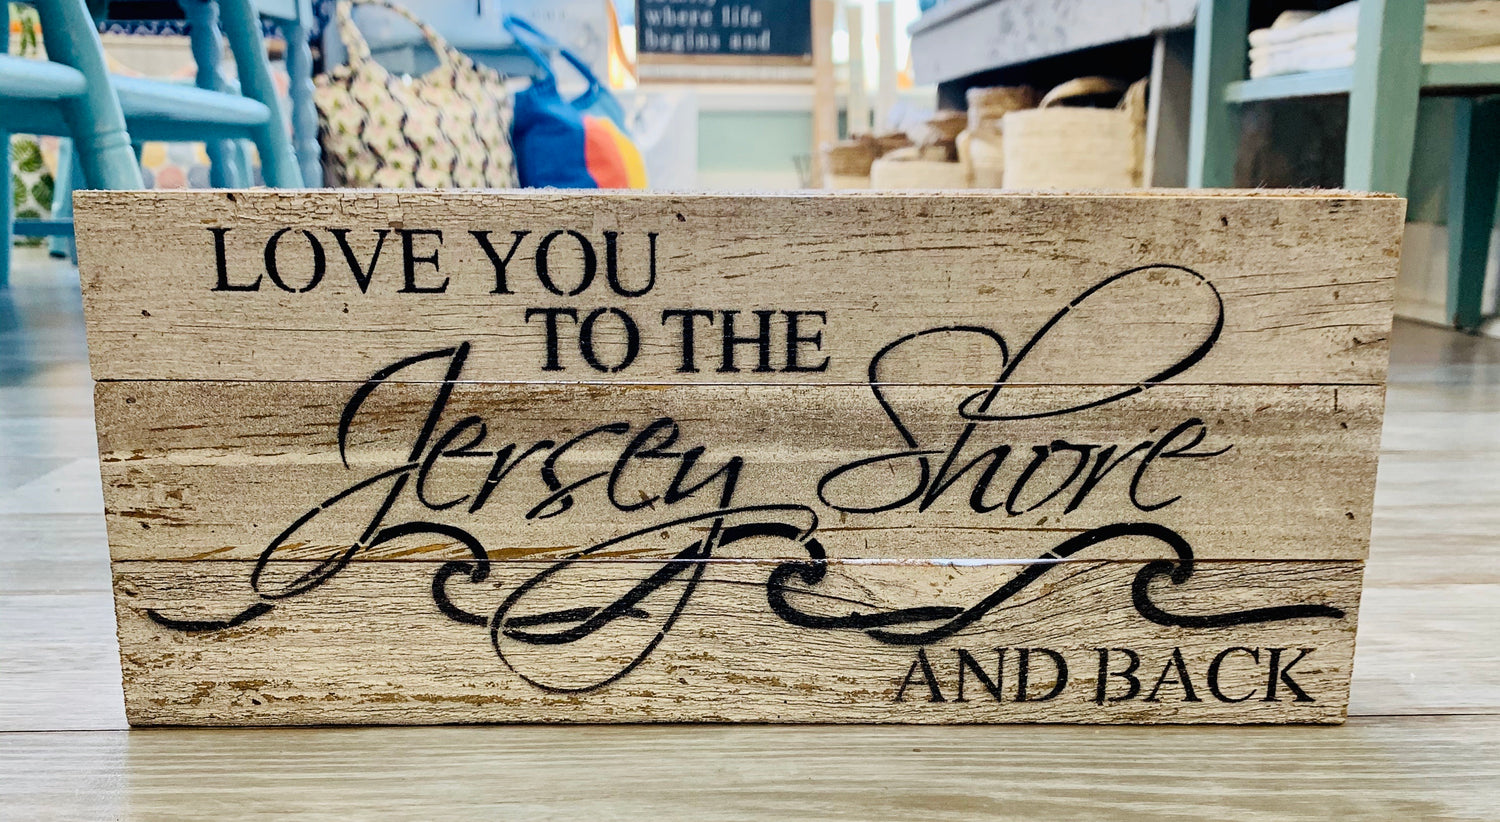 Love you to the Jersey Shore reclaimed wood sign